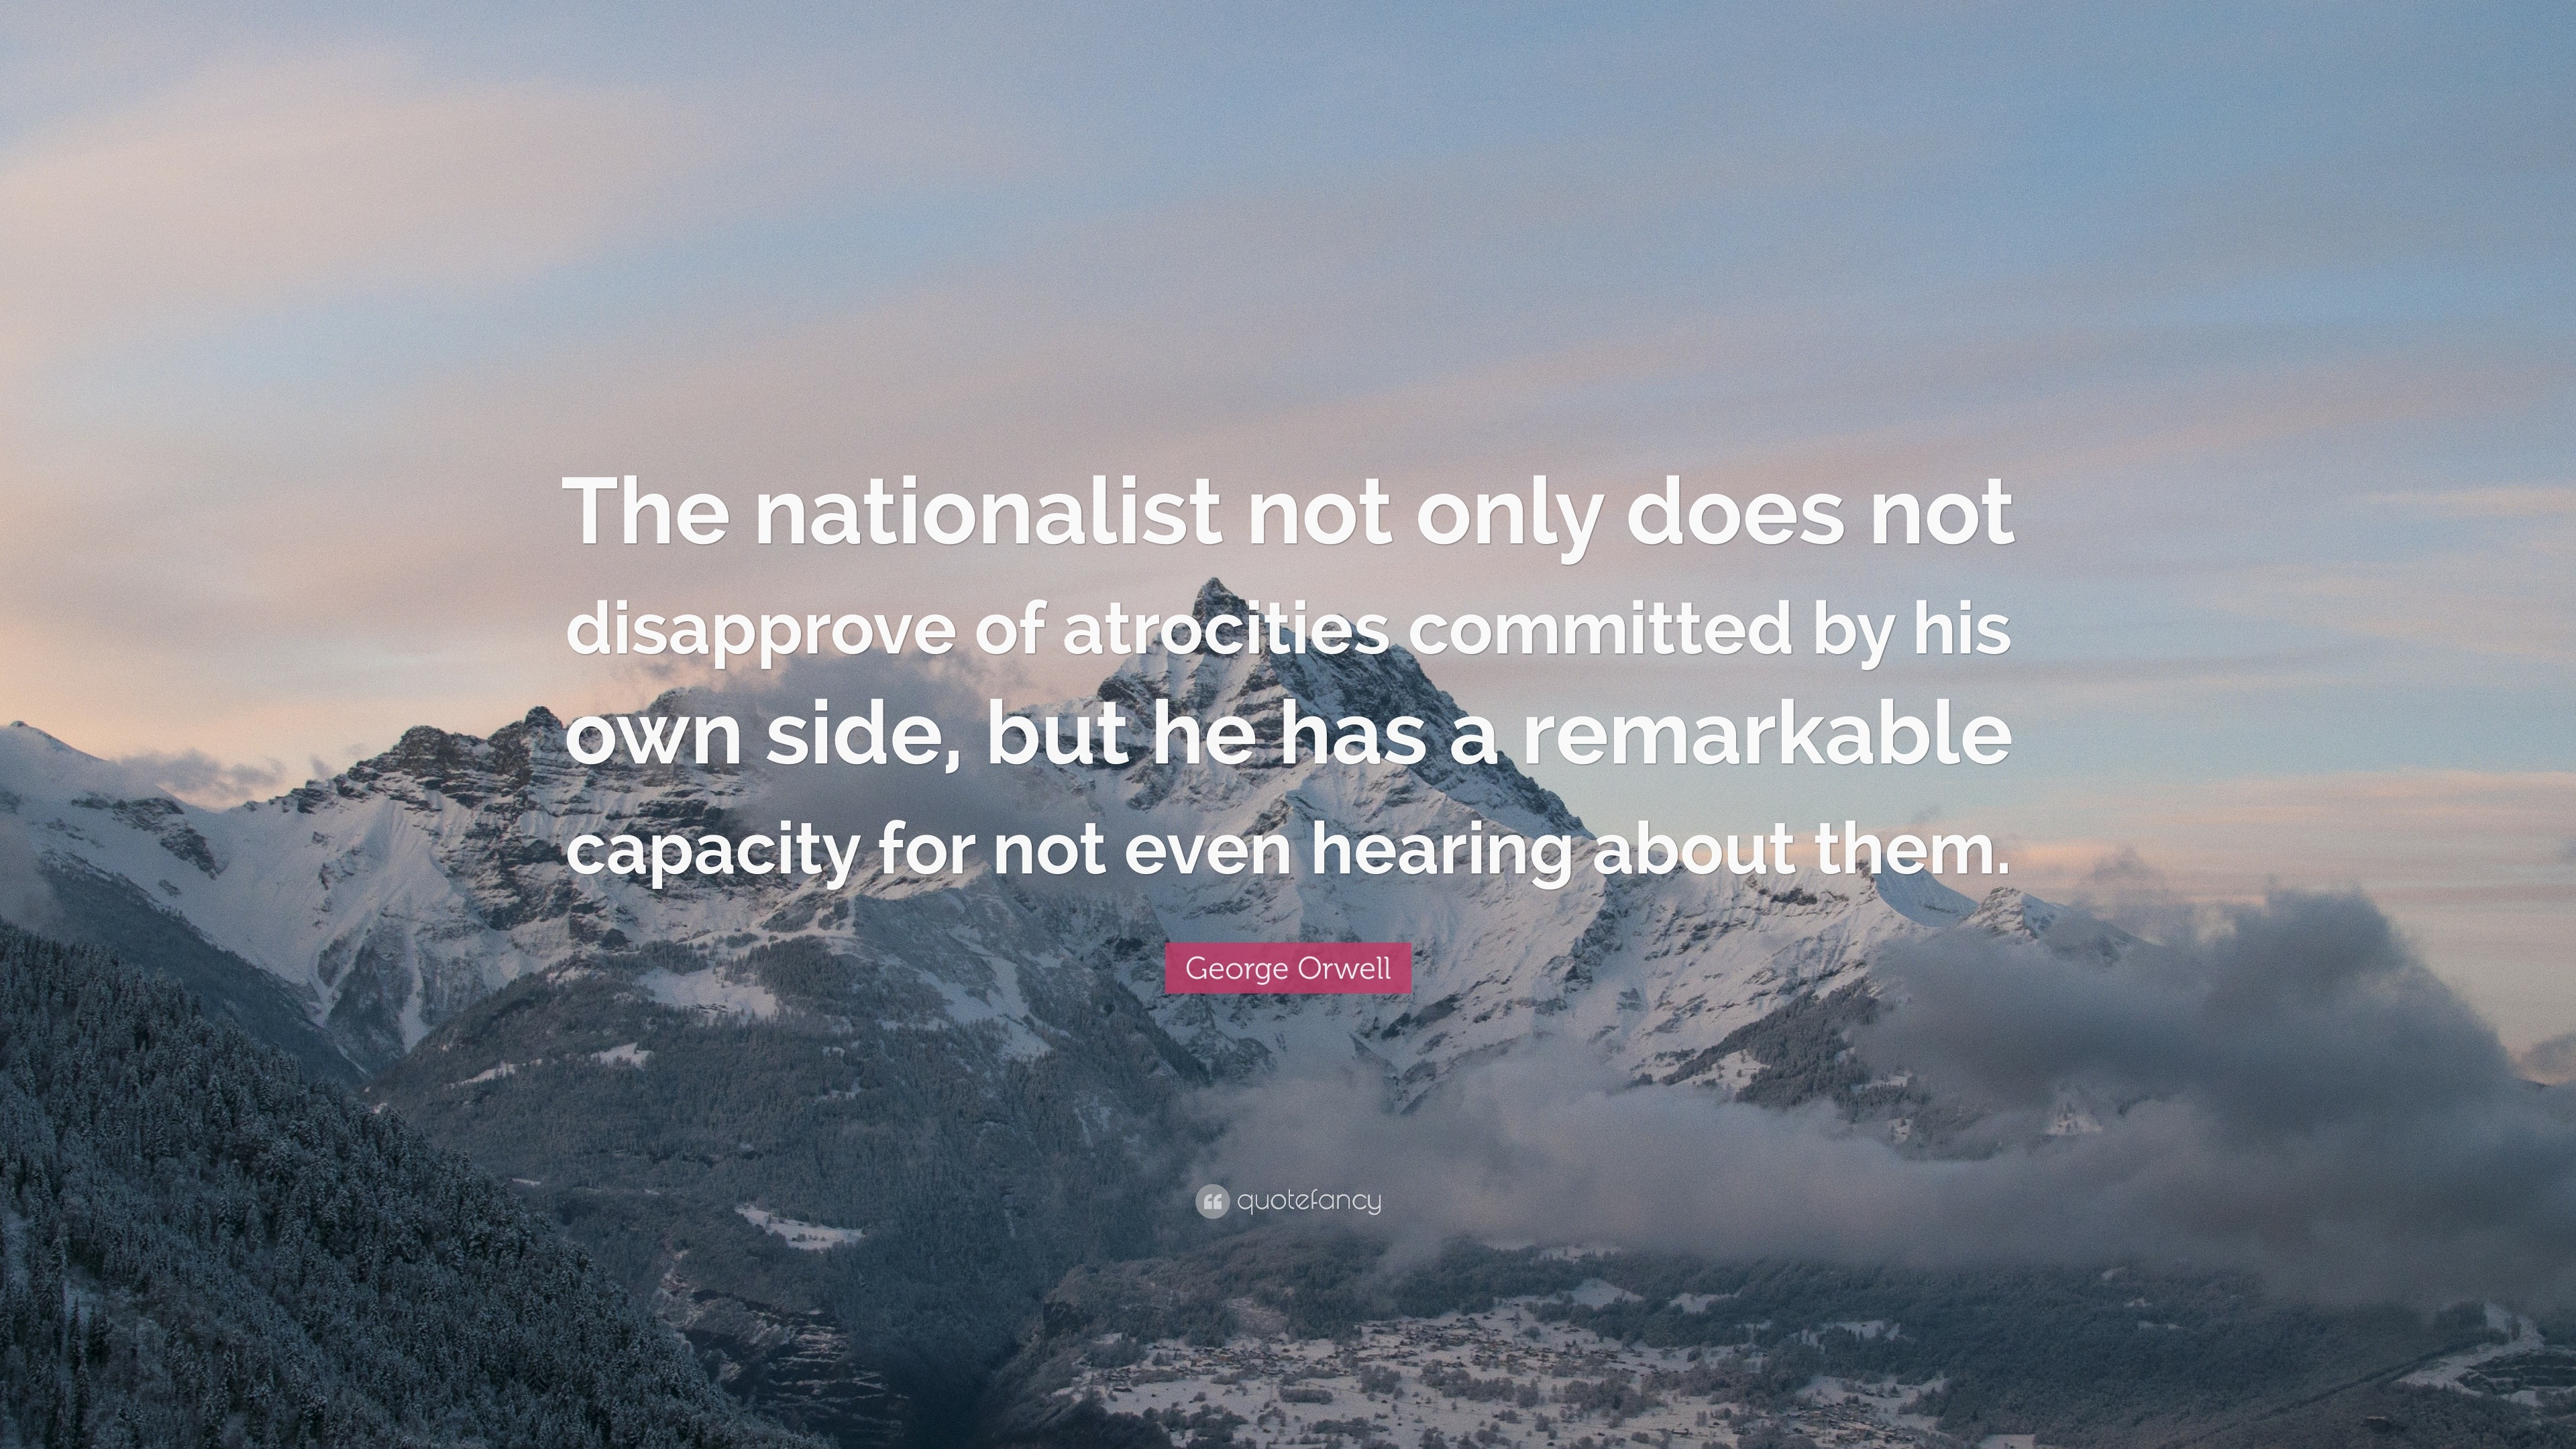 orwell notes on nationalism